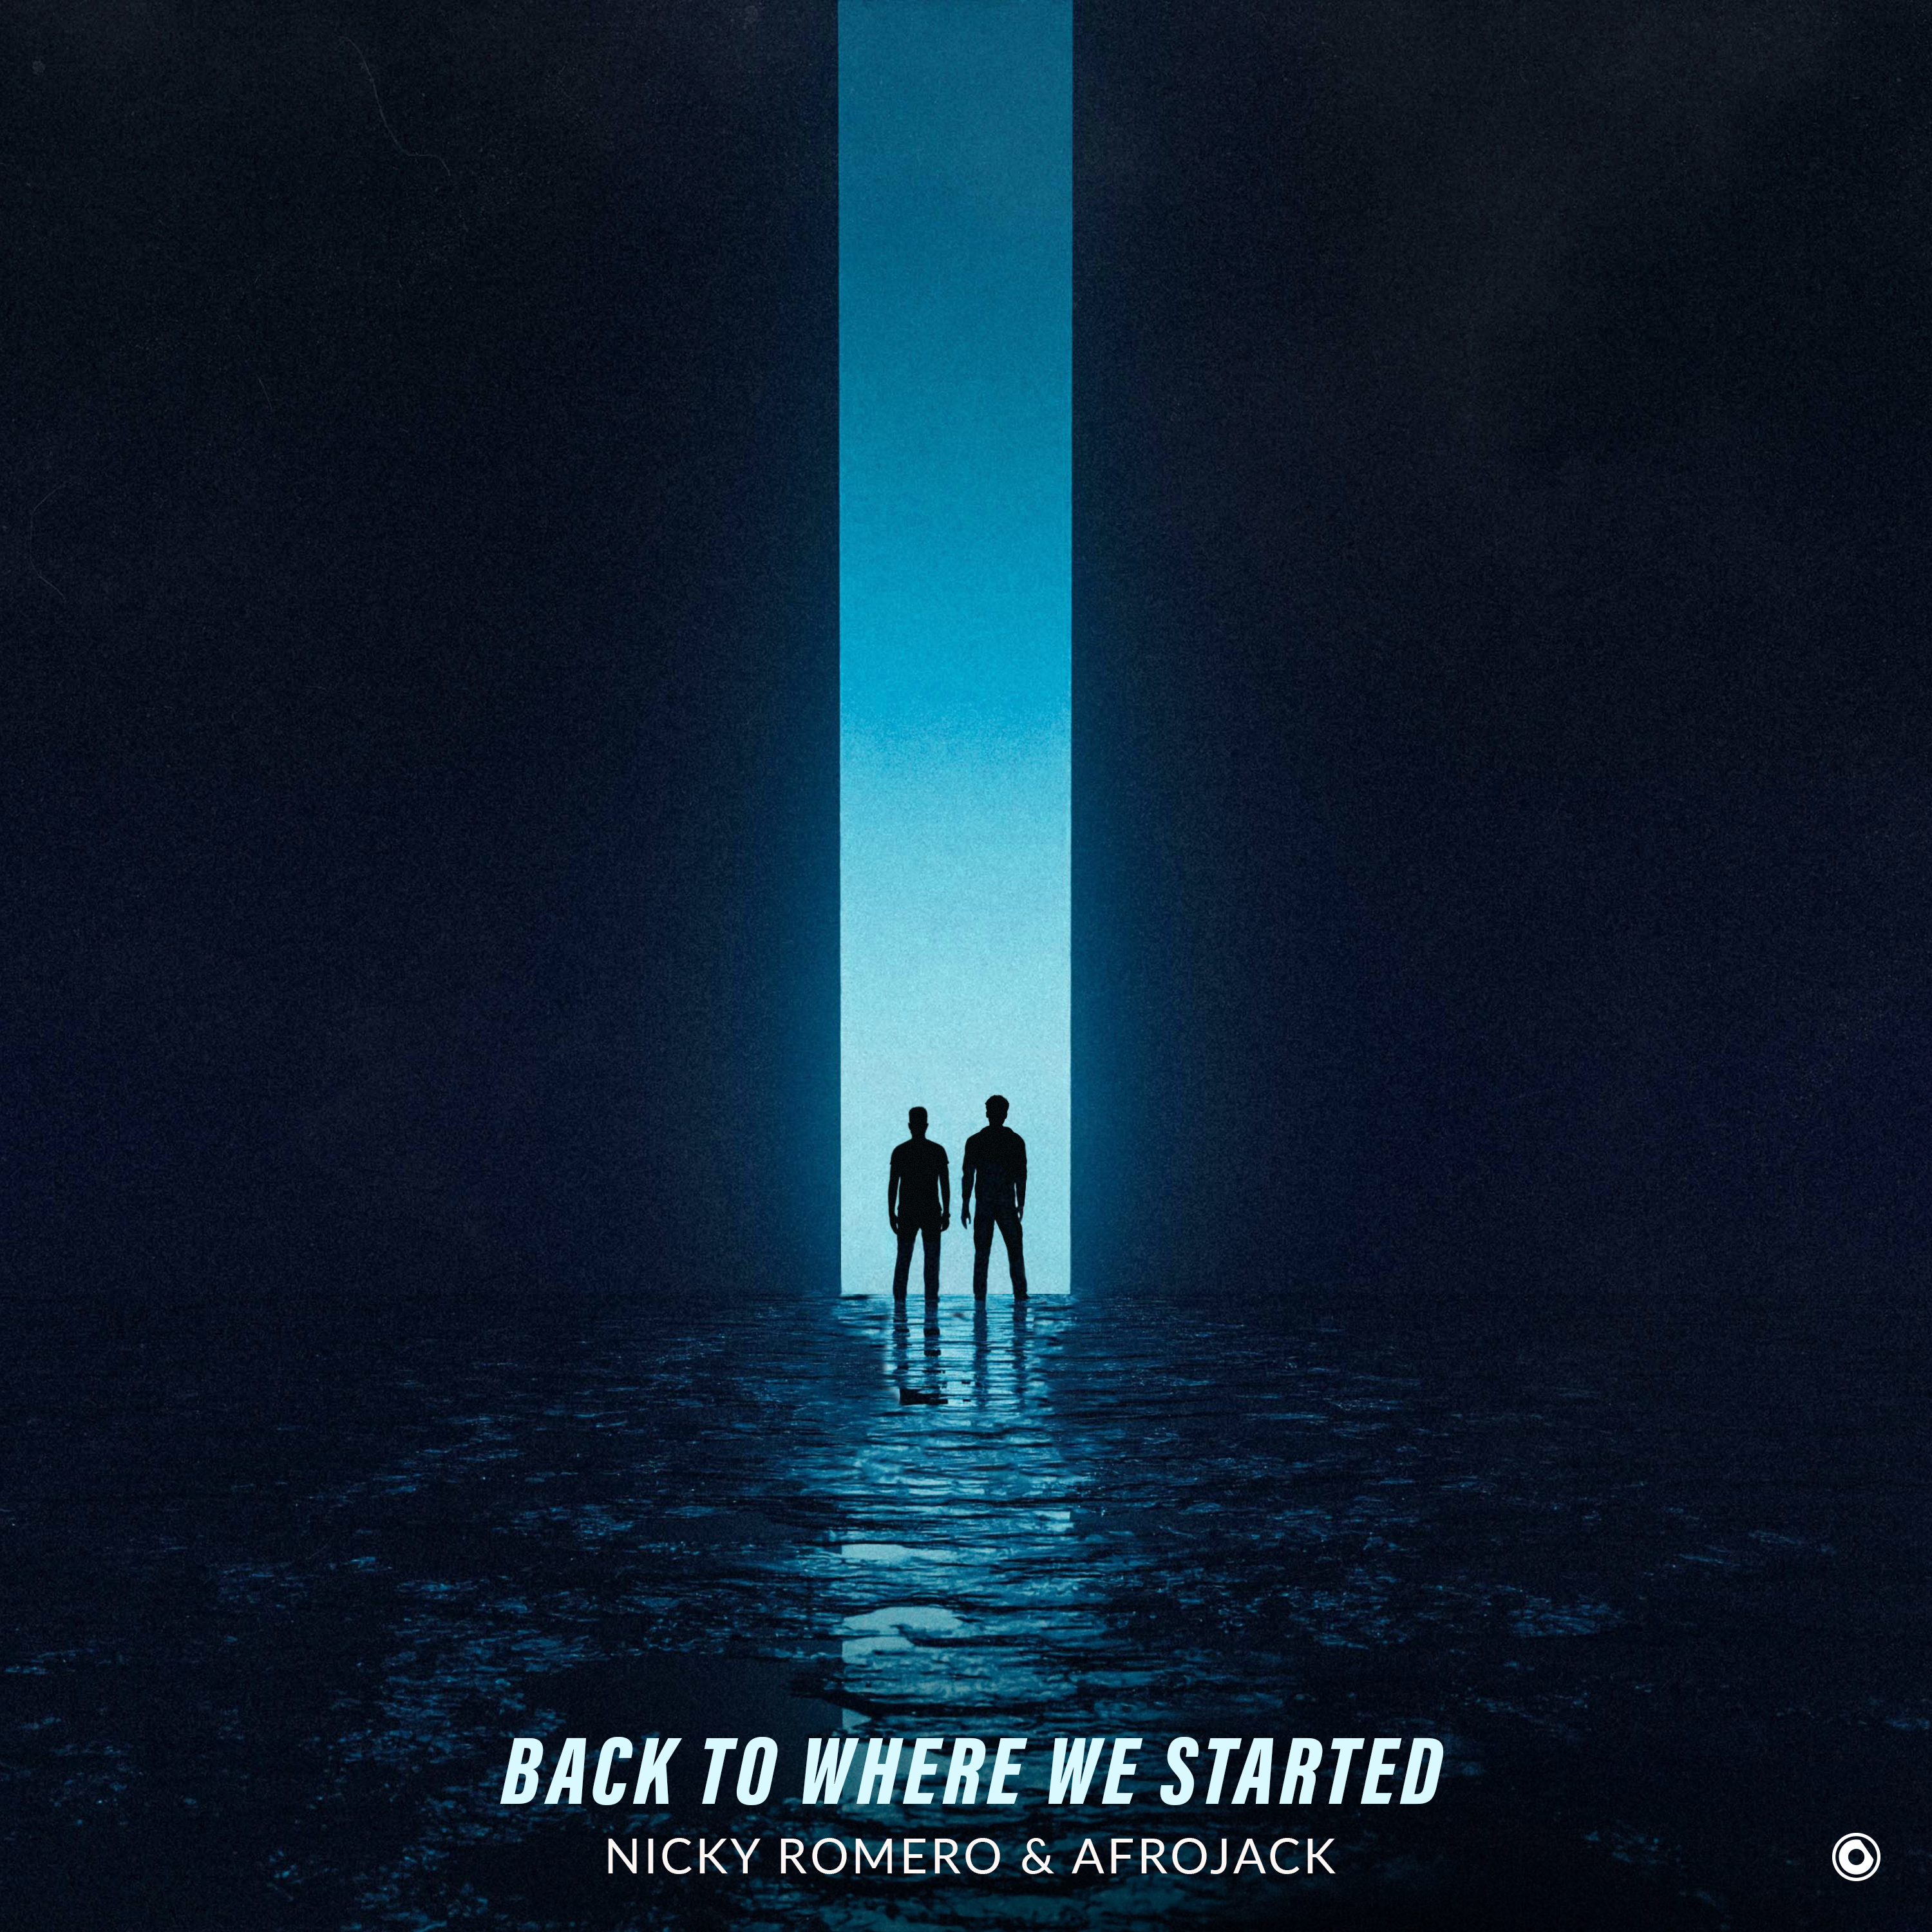  NICKY ROMERO Y AFROJACK JUNTOS “BACK TO WHERE WE STARTED”